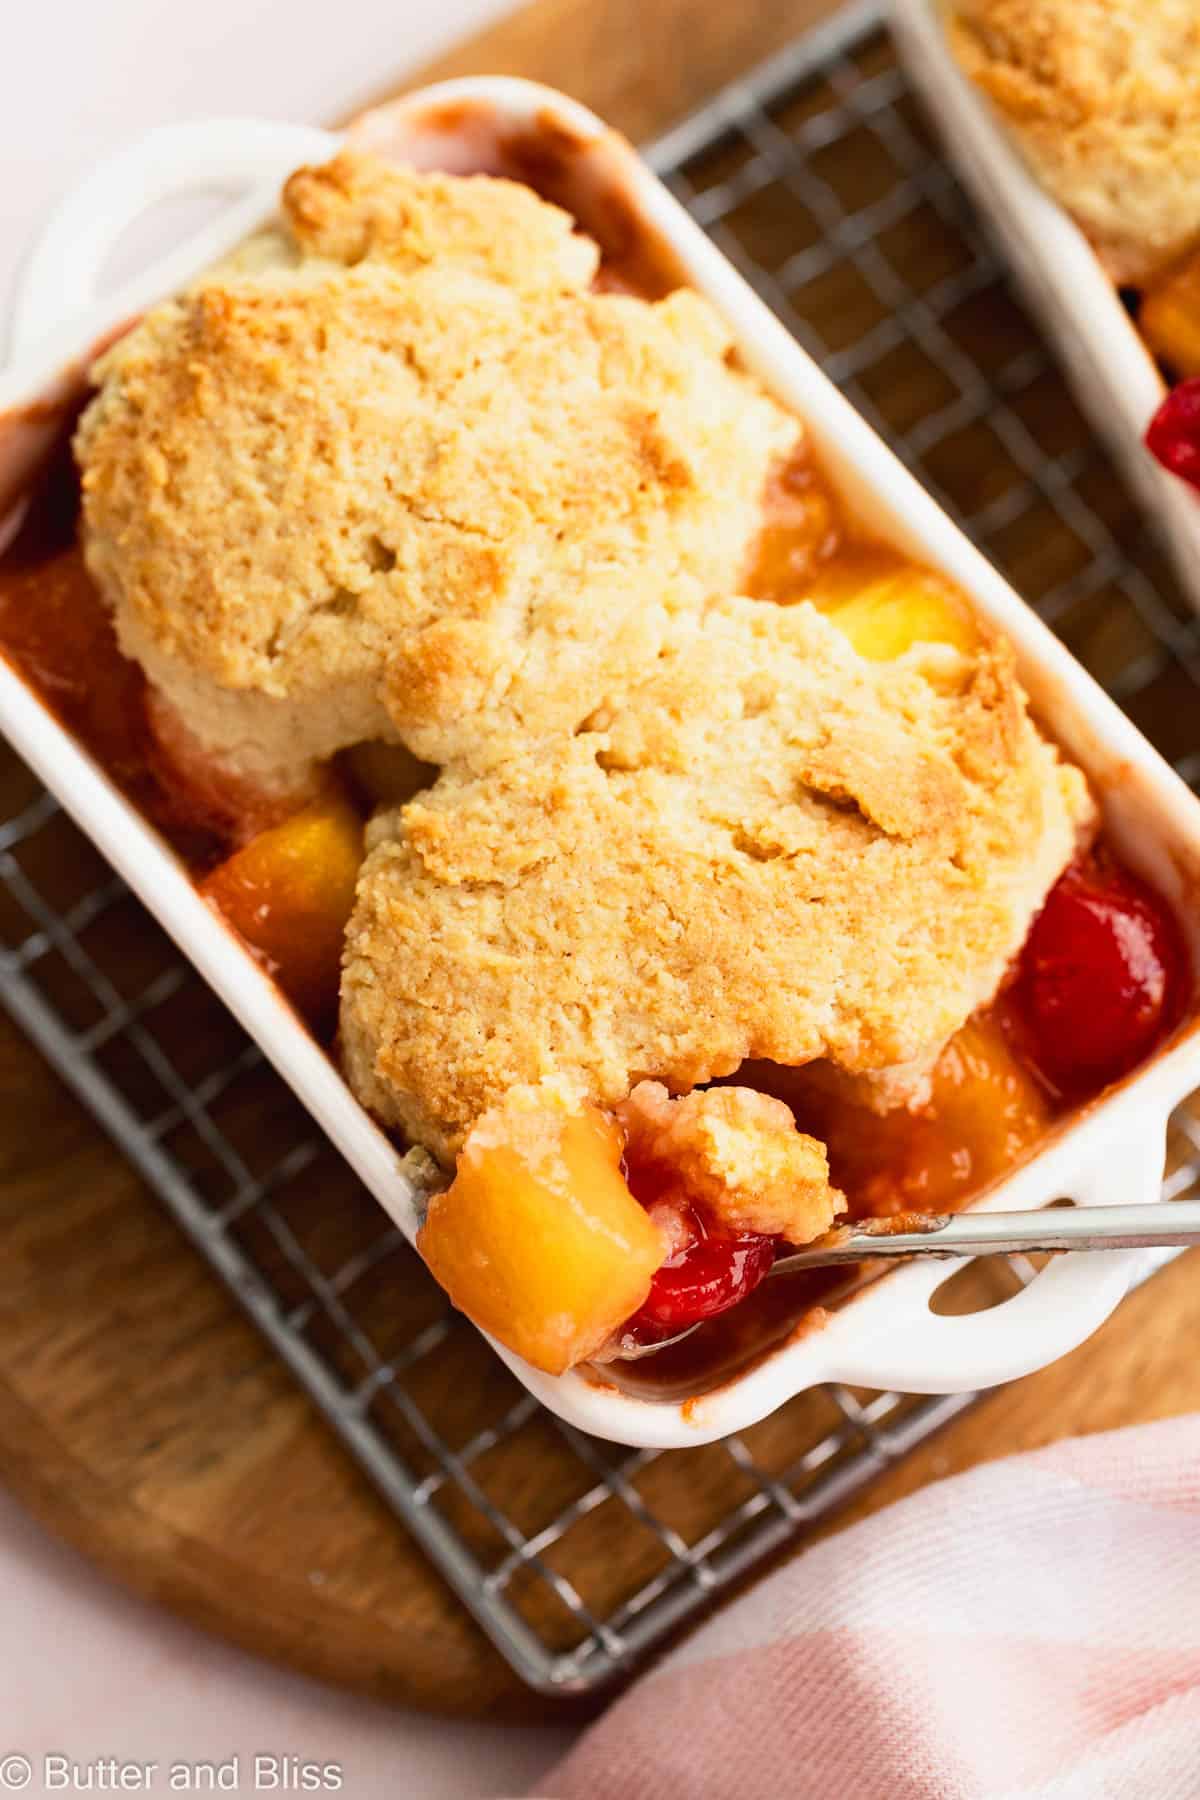 Gooey insides and crunchy biscuit outside of a pineapple upside down cobbler in a white serving dish.